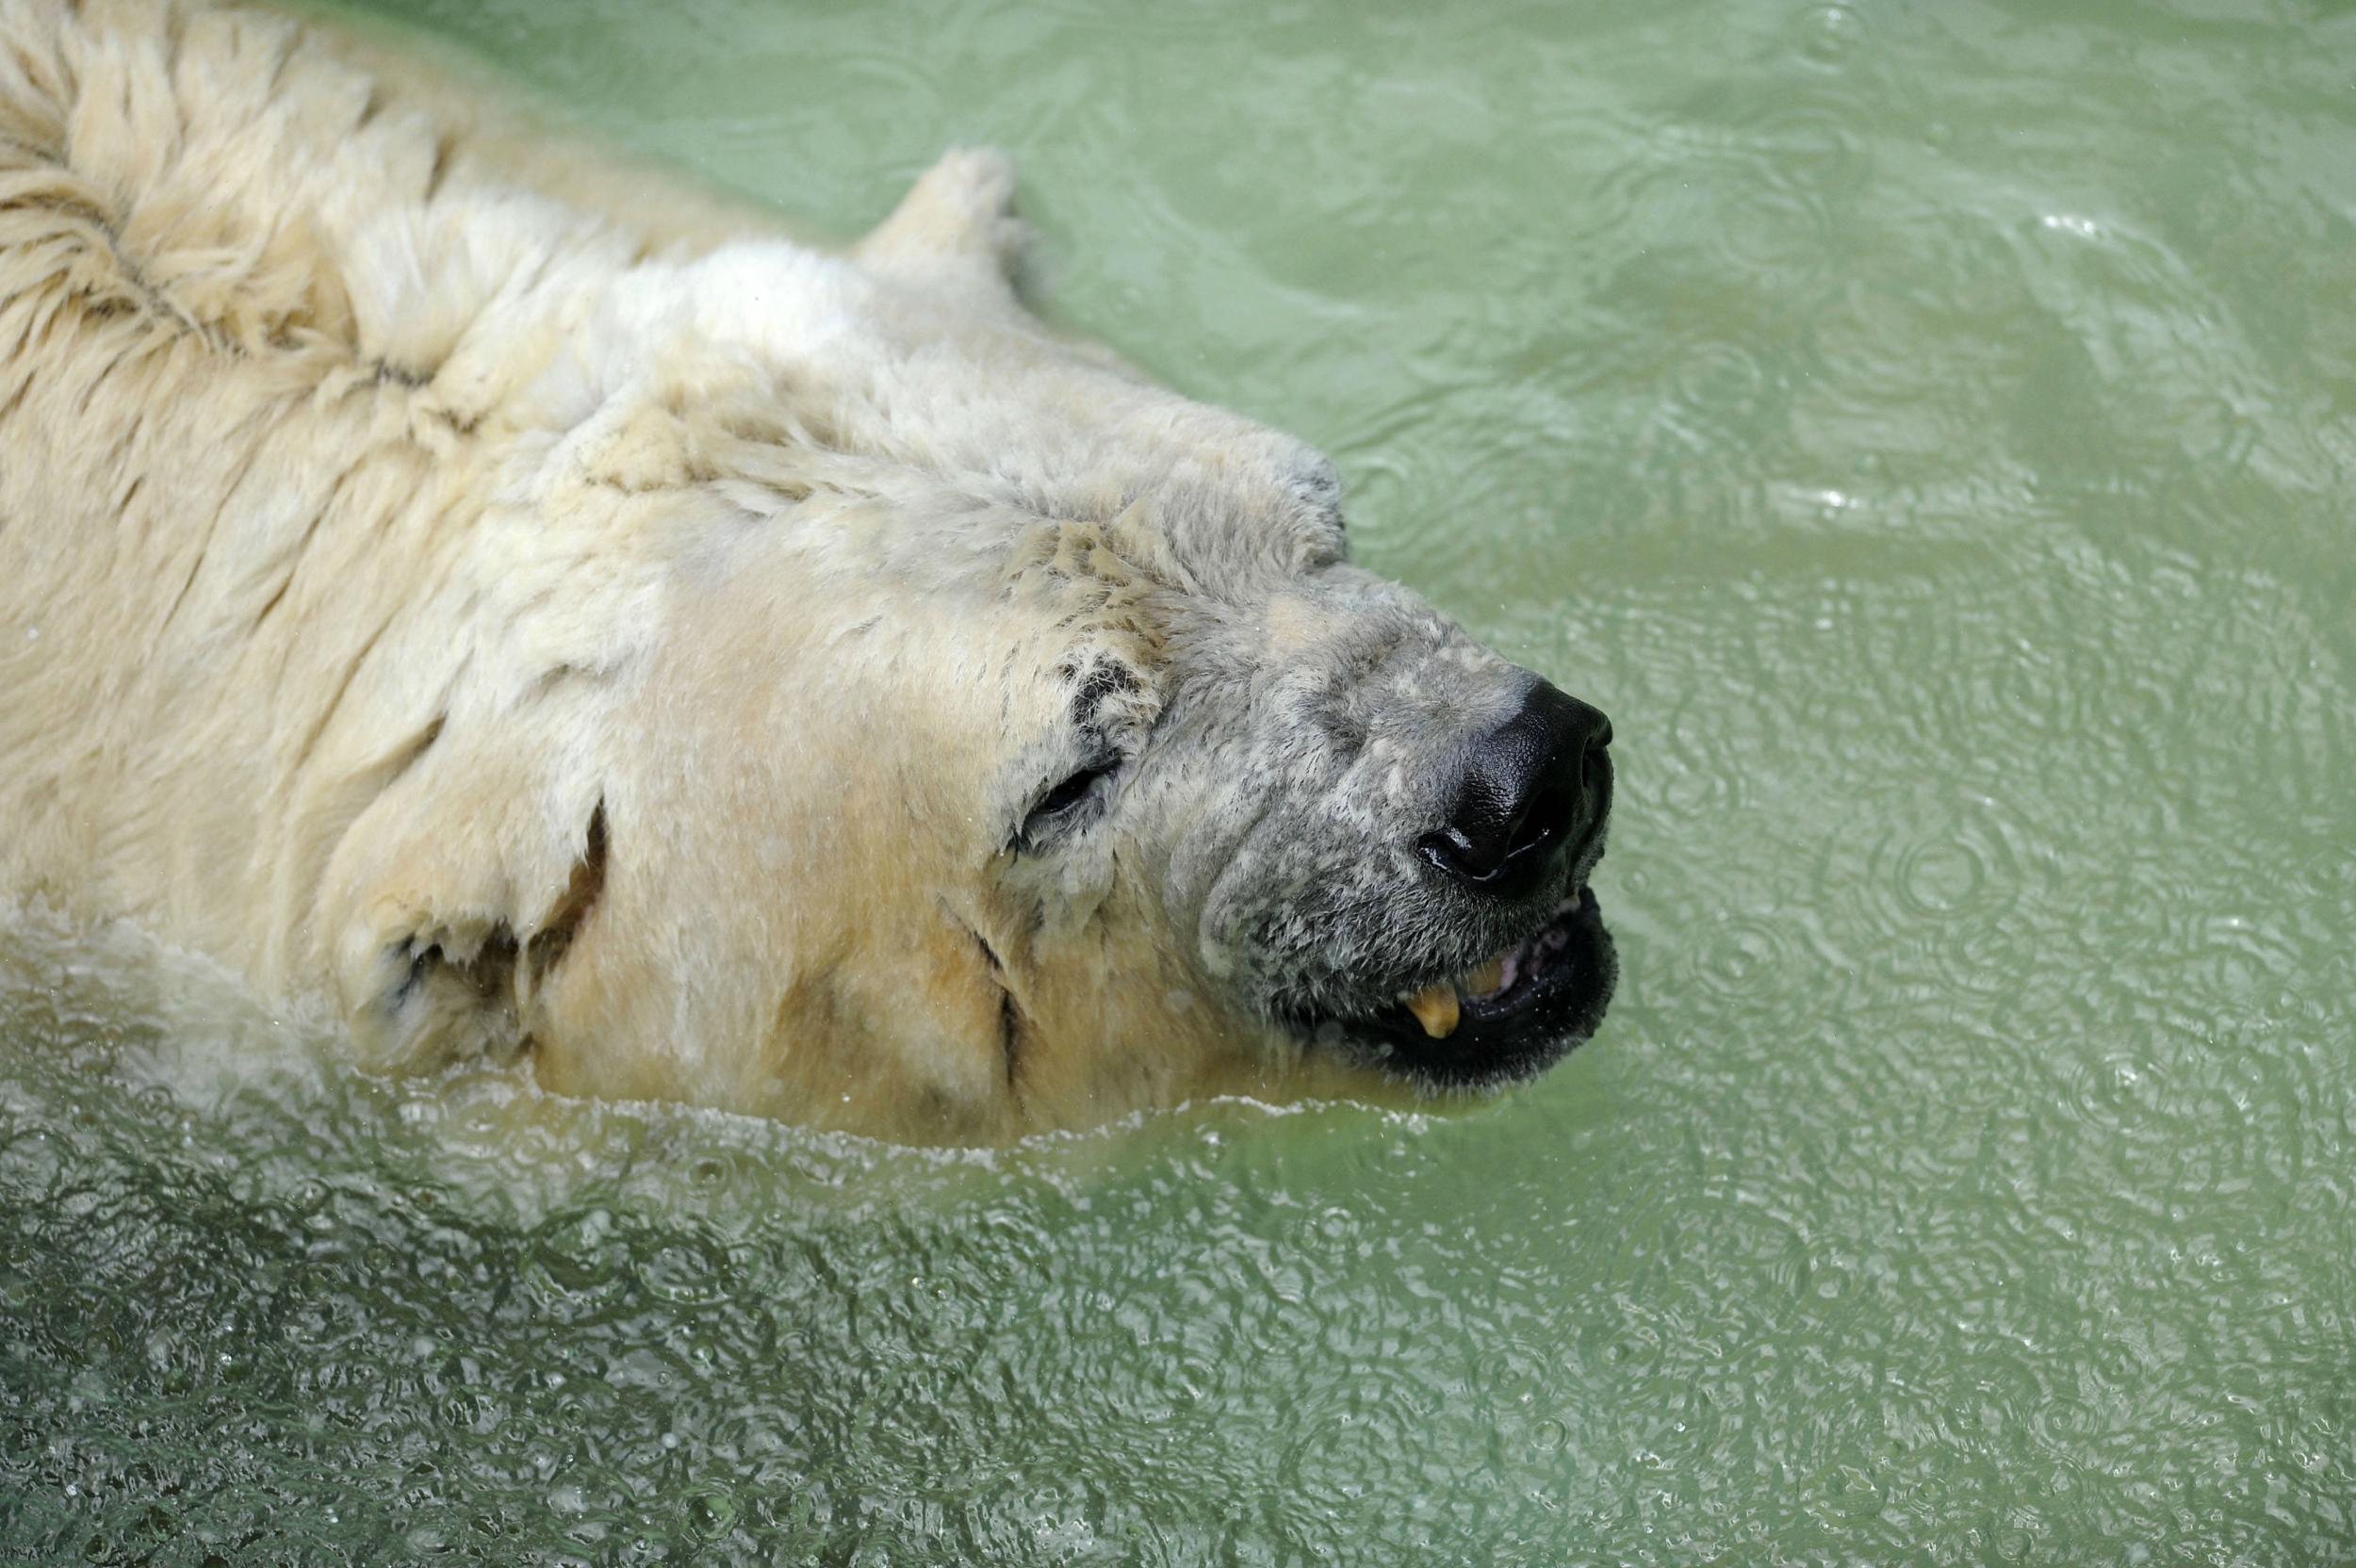 Arturo lived alone for years, and spent all of his life in an enclosure